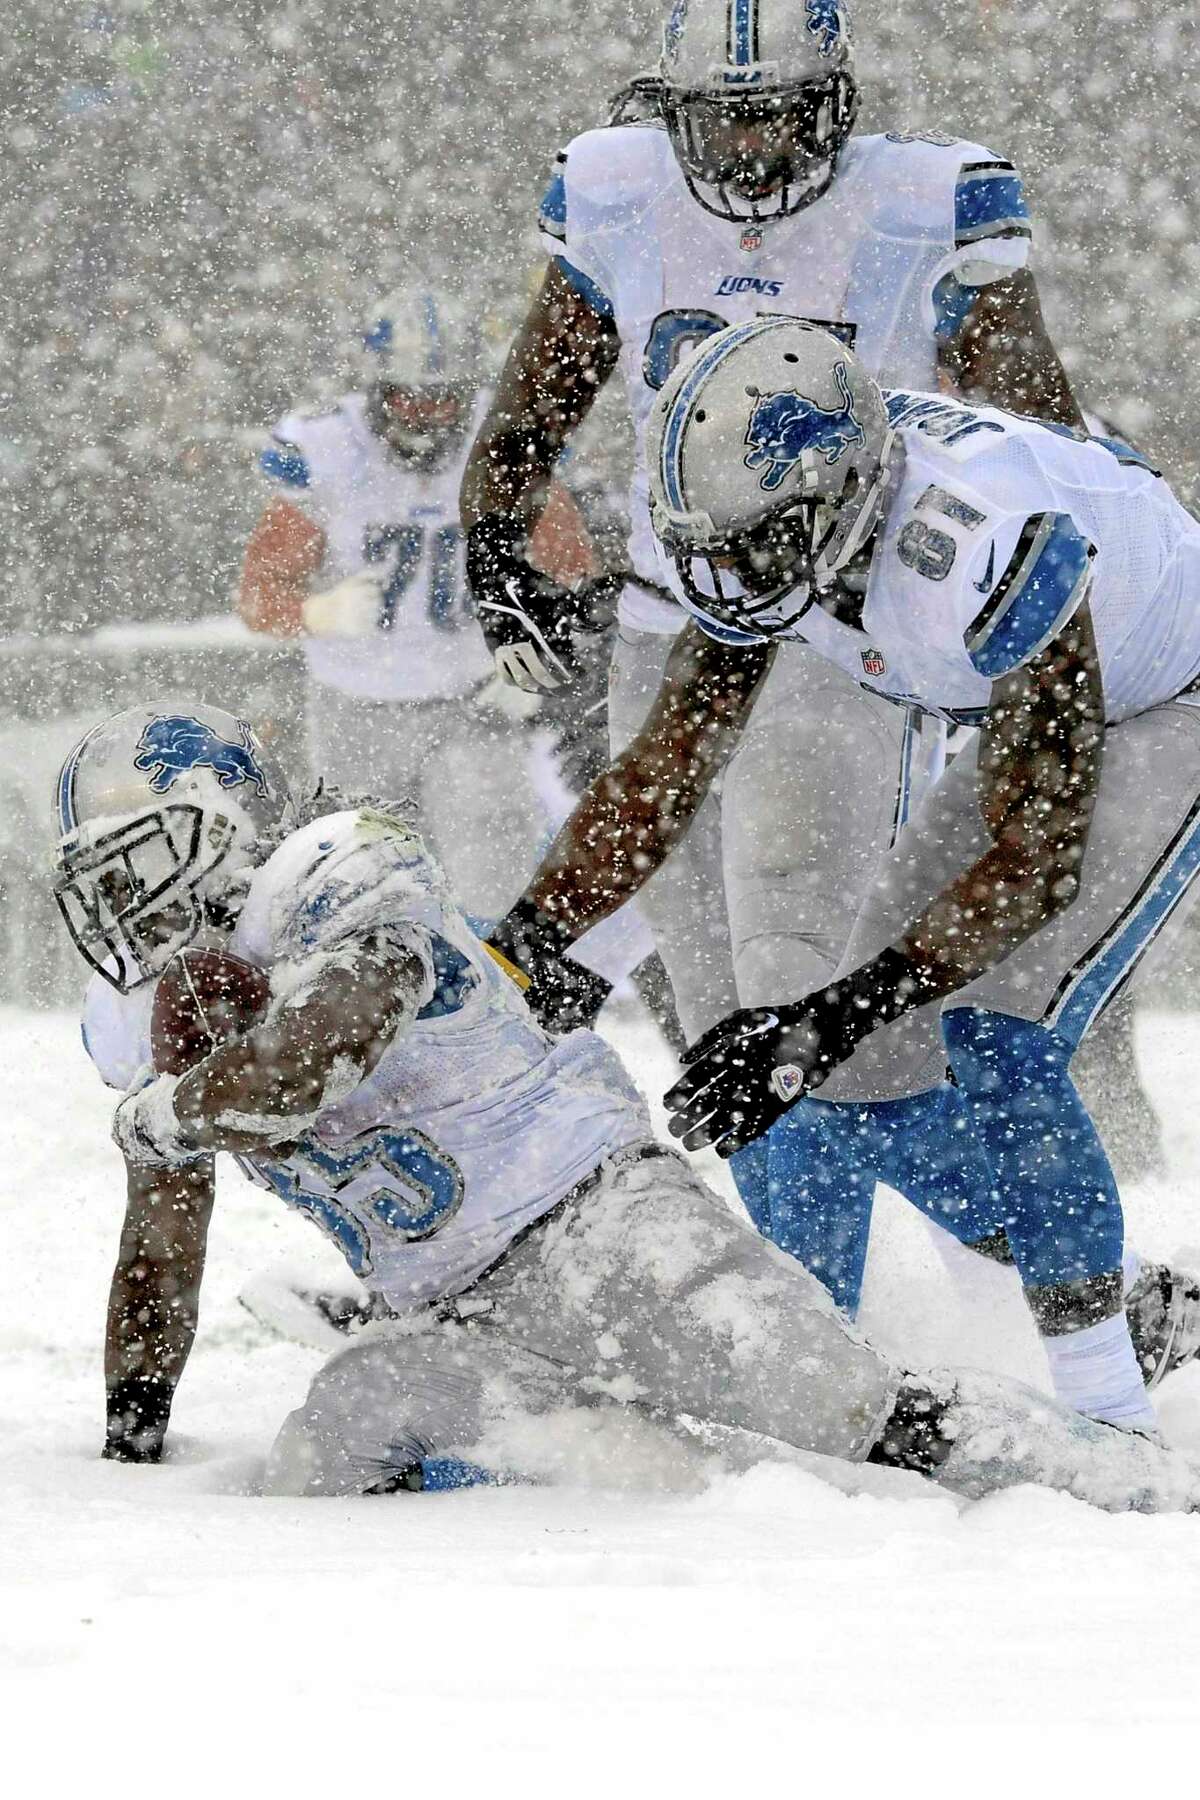 This was supposed to be Detroit Lions running back Reggie Bush scoring a touchdown to help the Register’s Dan Nowak. Instead, Bush was scratched right before kickoff and Joique Bell, left, scored this snowy touchdown against the Eagles on Sunday in Philadelphia.